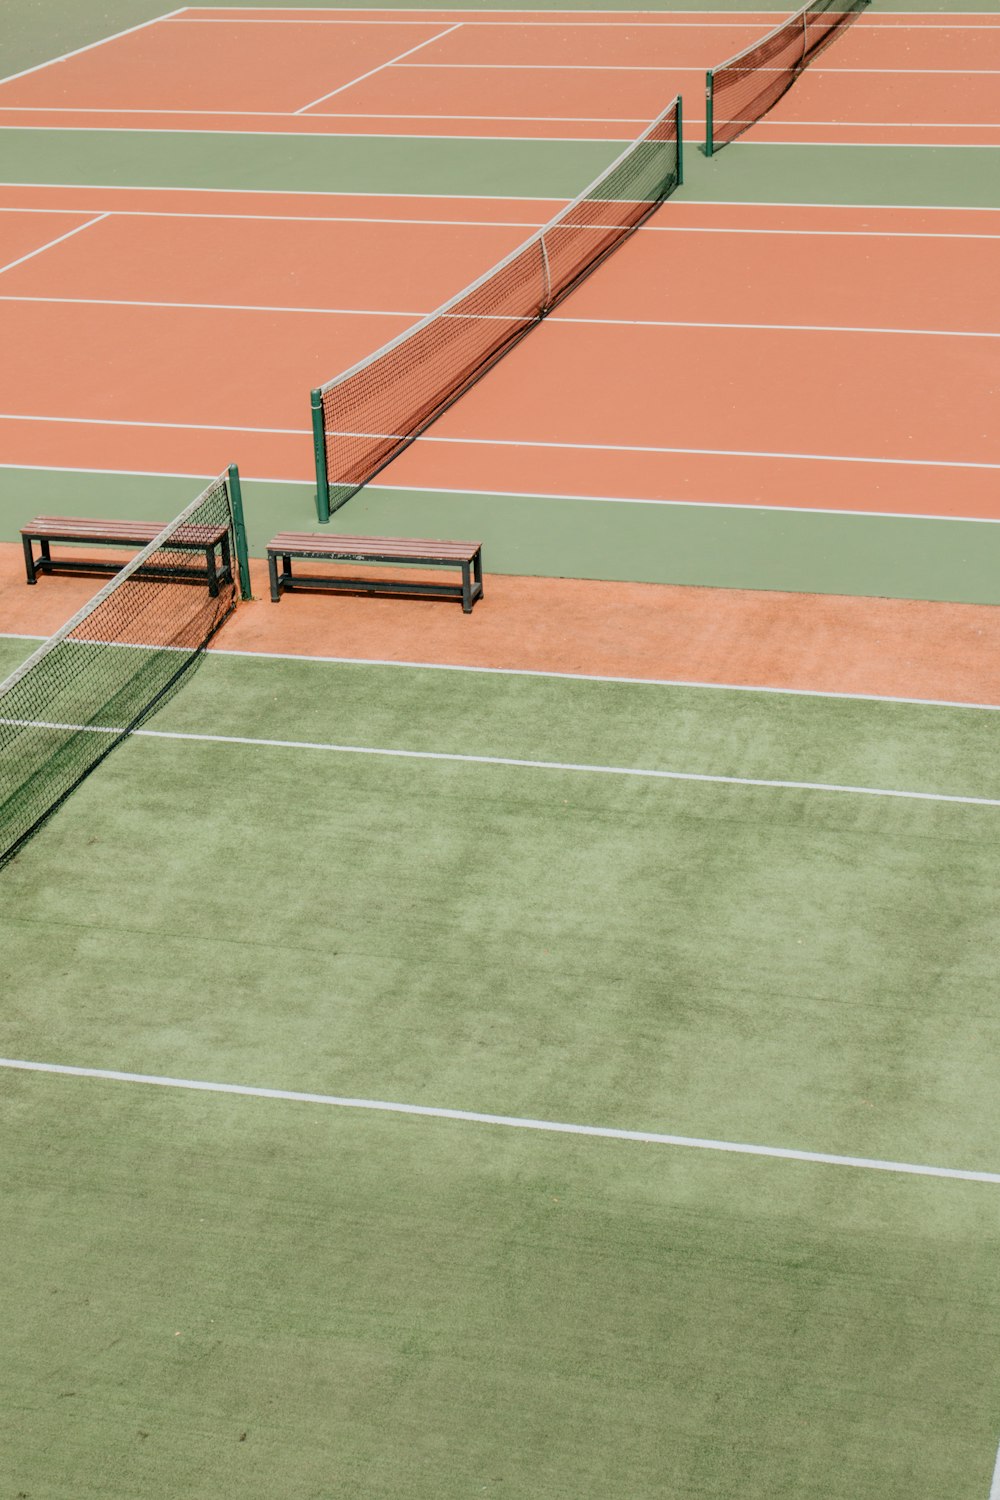 Tennis Court Pictures | Download Free Images on Unsplash